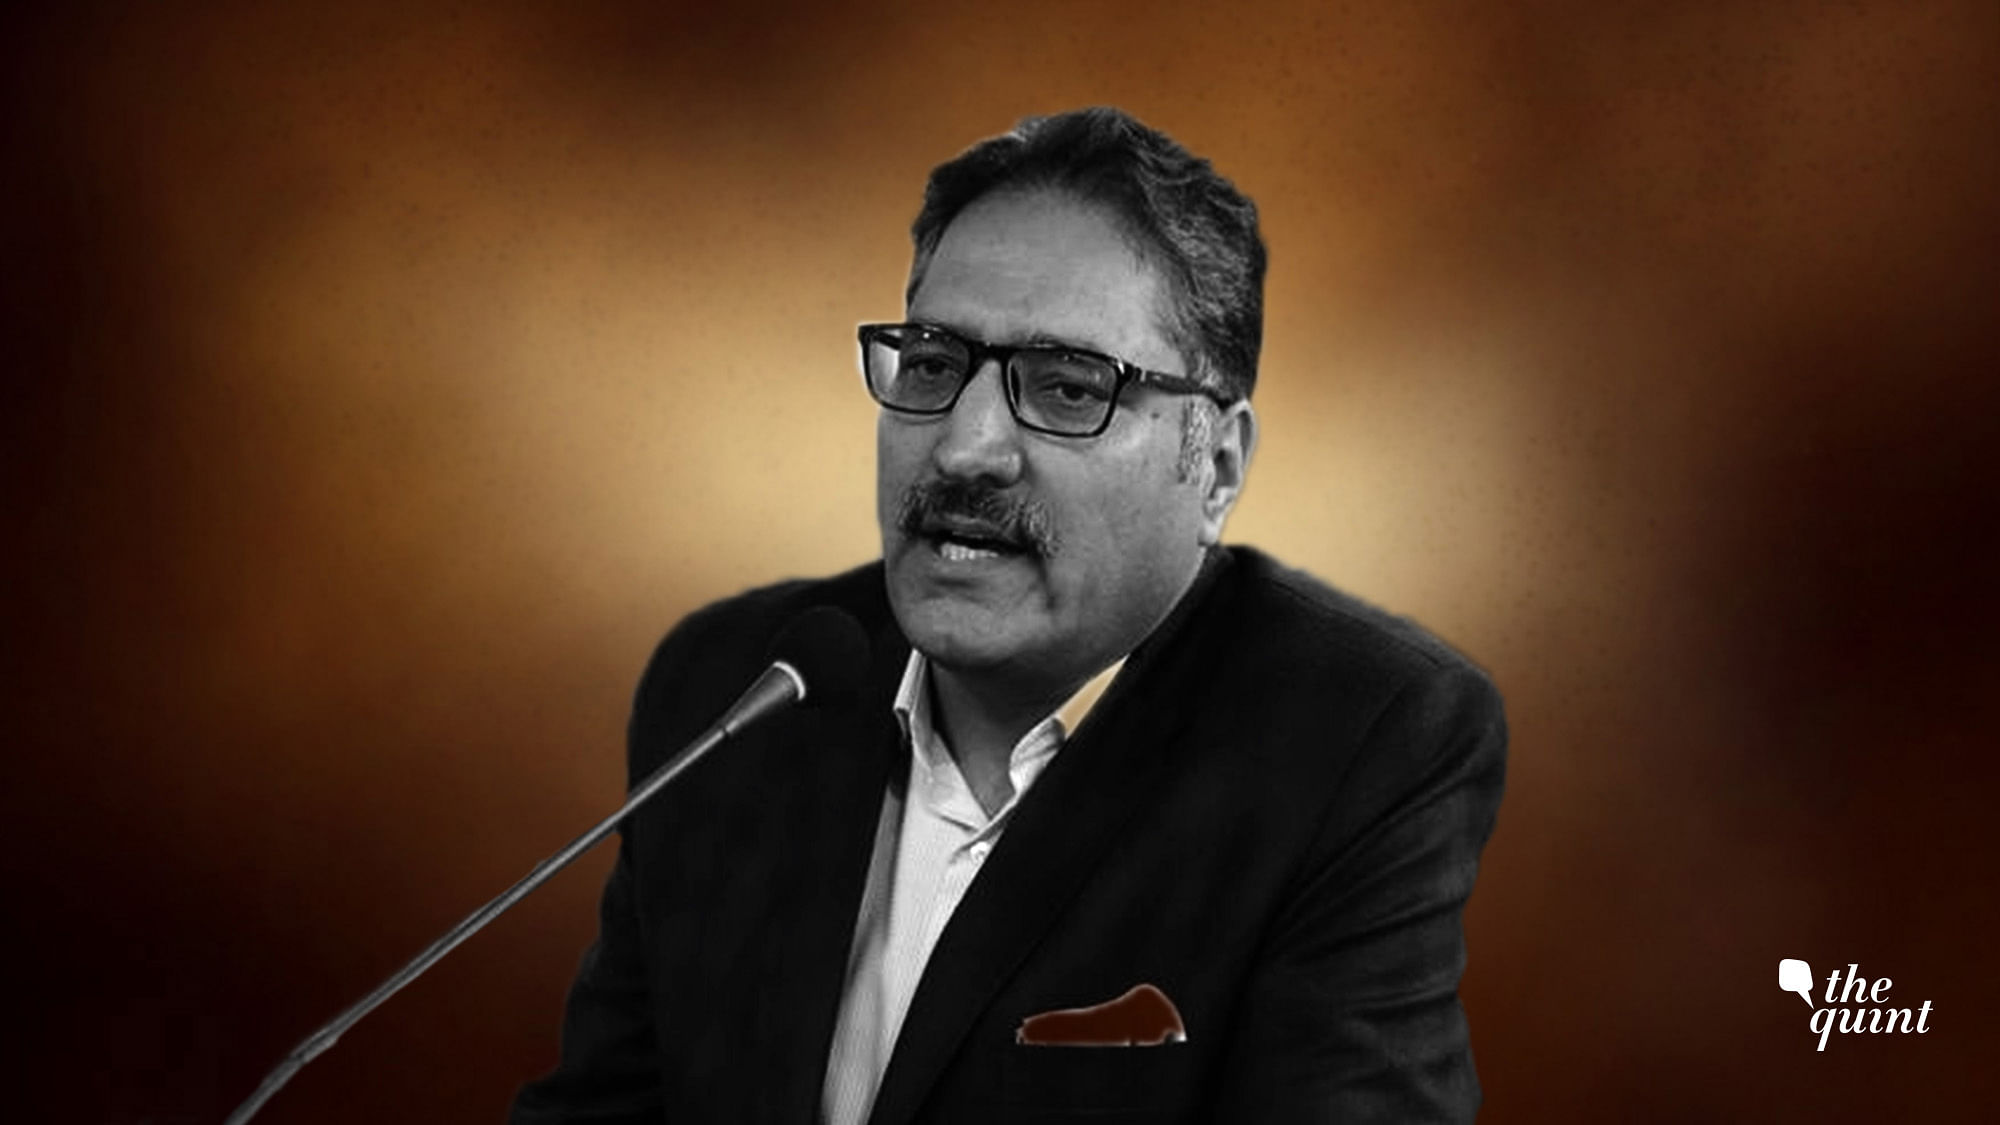 Shujaat Bukhari – I will always remember him as the man who invited 200 aspiring journalists to Kashmir to find out the truth.